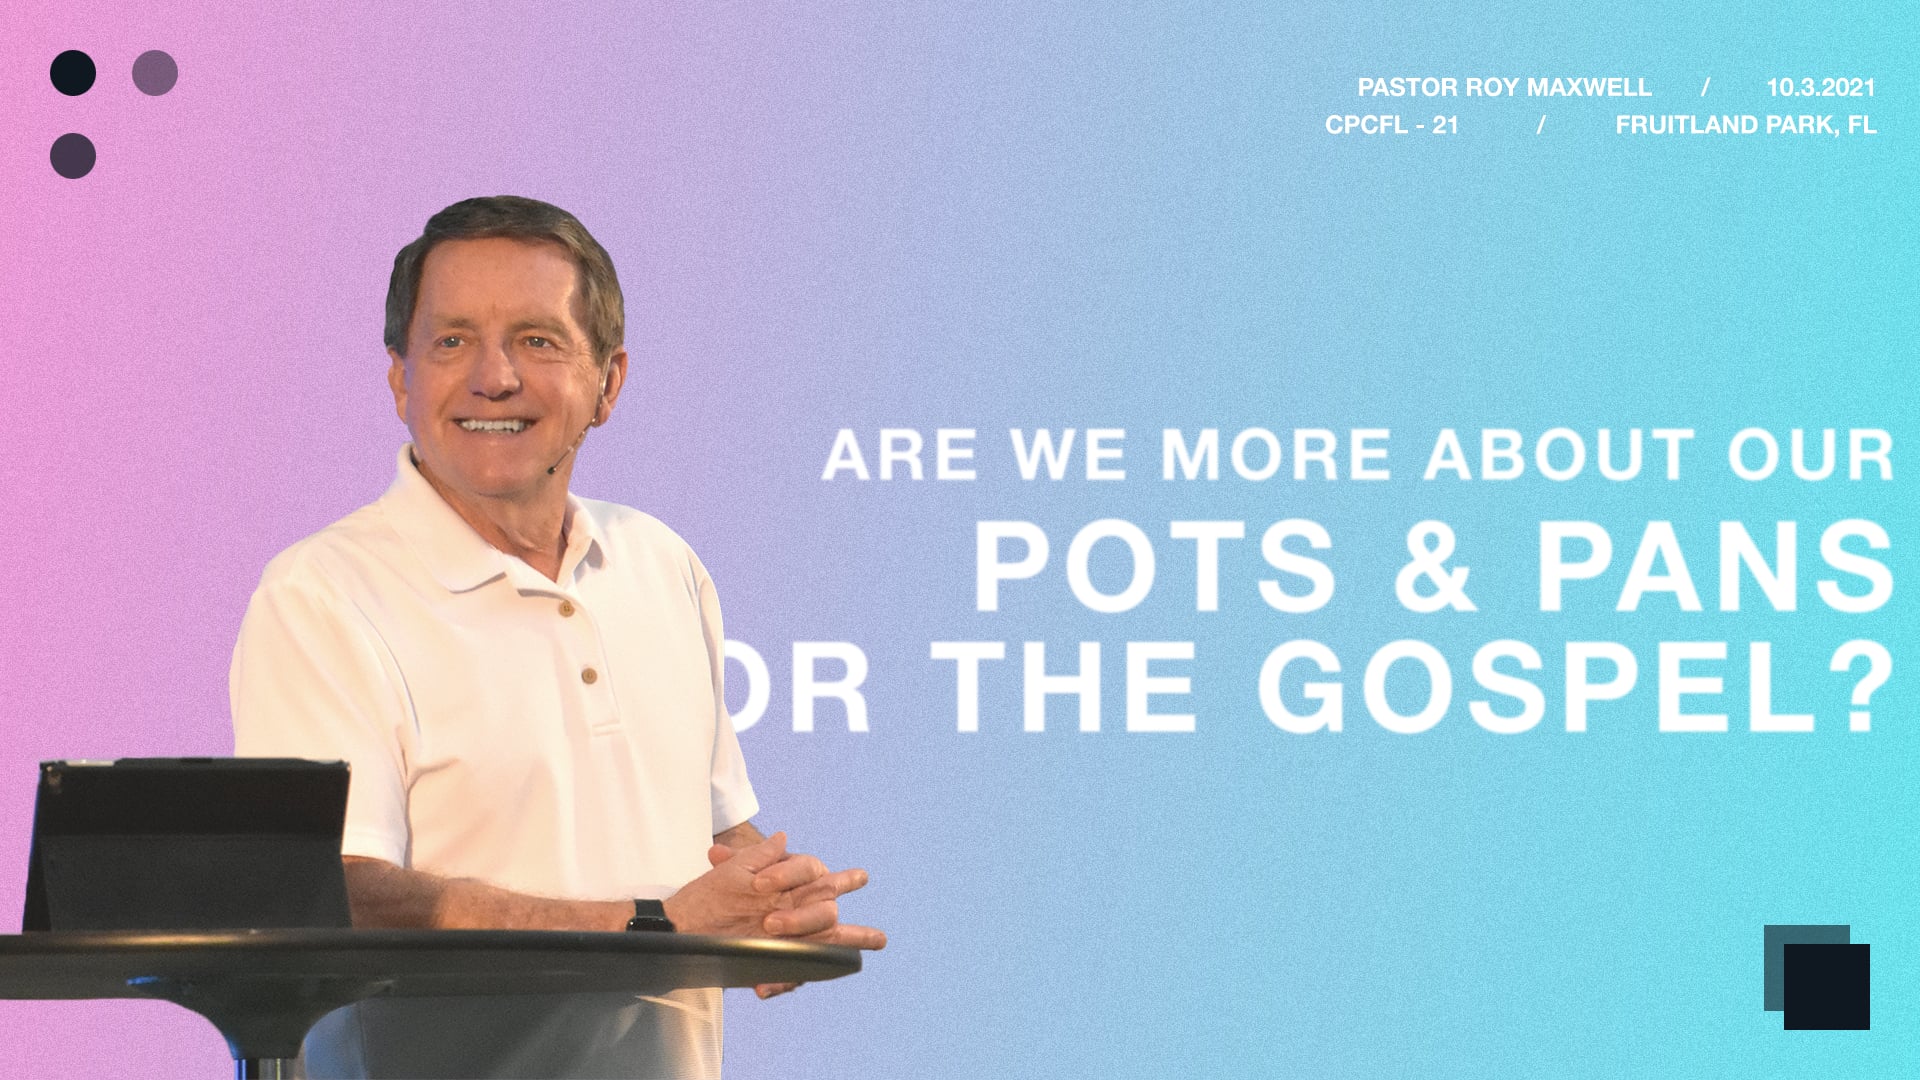 Pots and Pans or The Gospel?